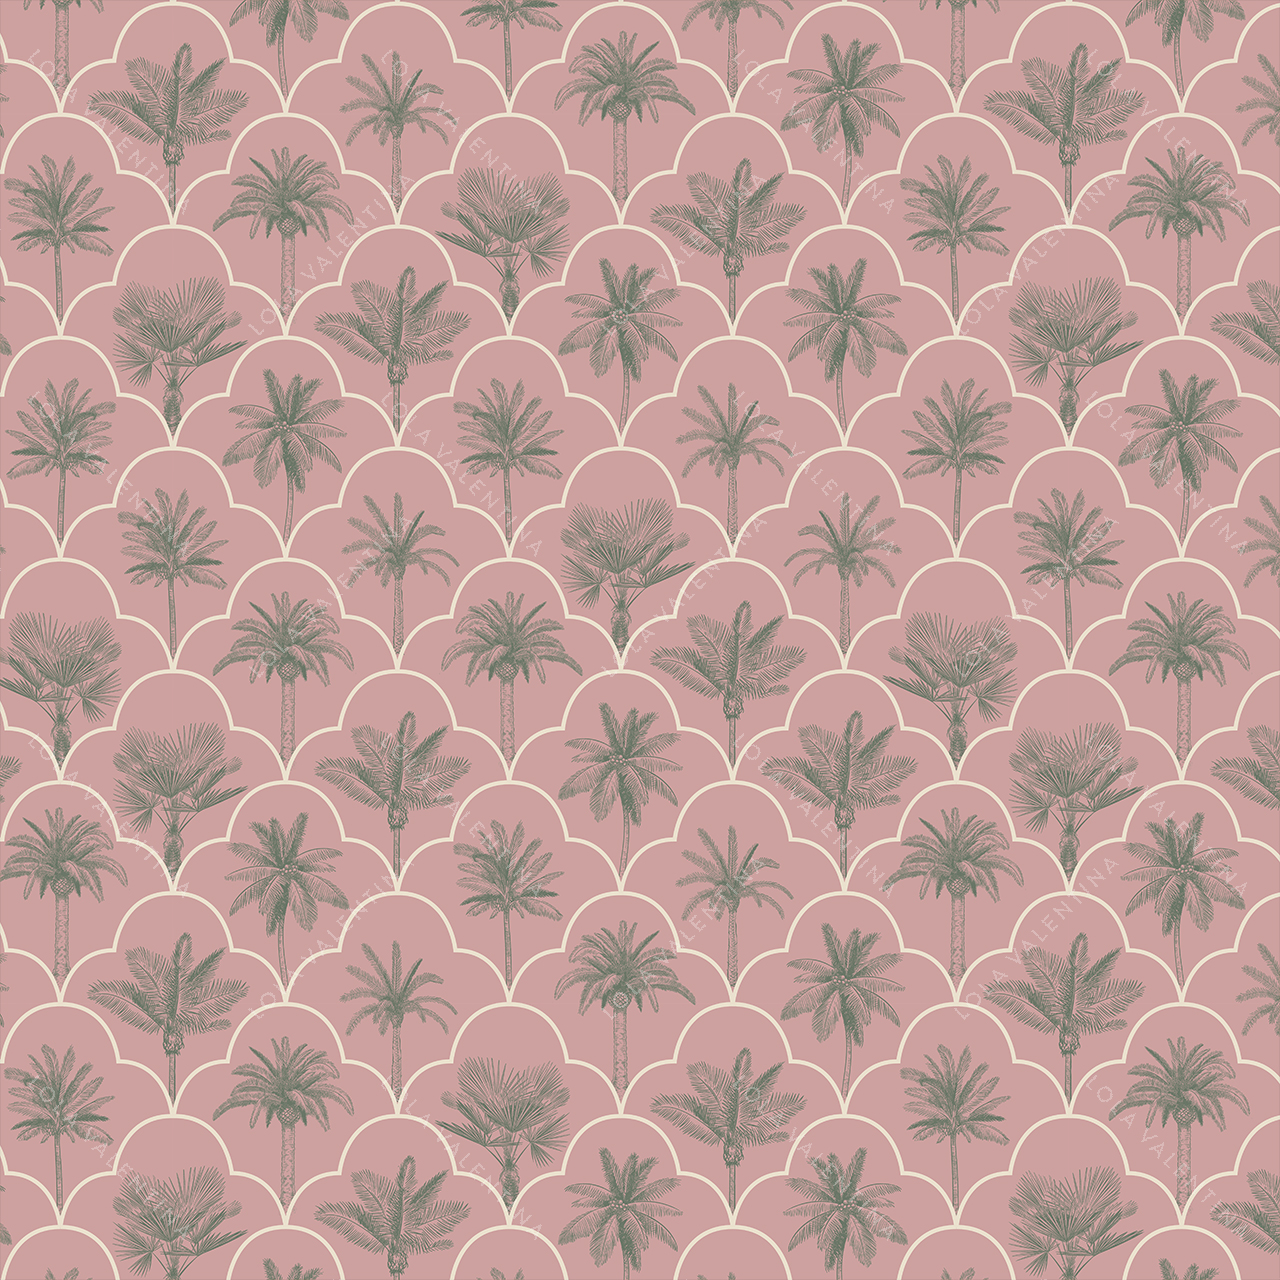 Blush-Malachite-Biscayne-Pattern-30x30-From-Deco-Collection-Lola-Valentina-High-End-Linen-Rental